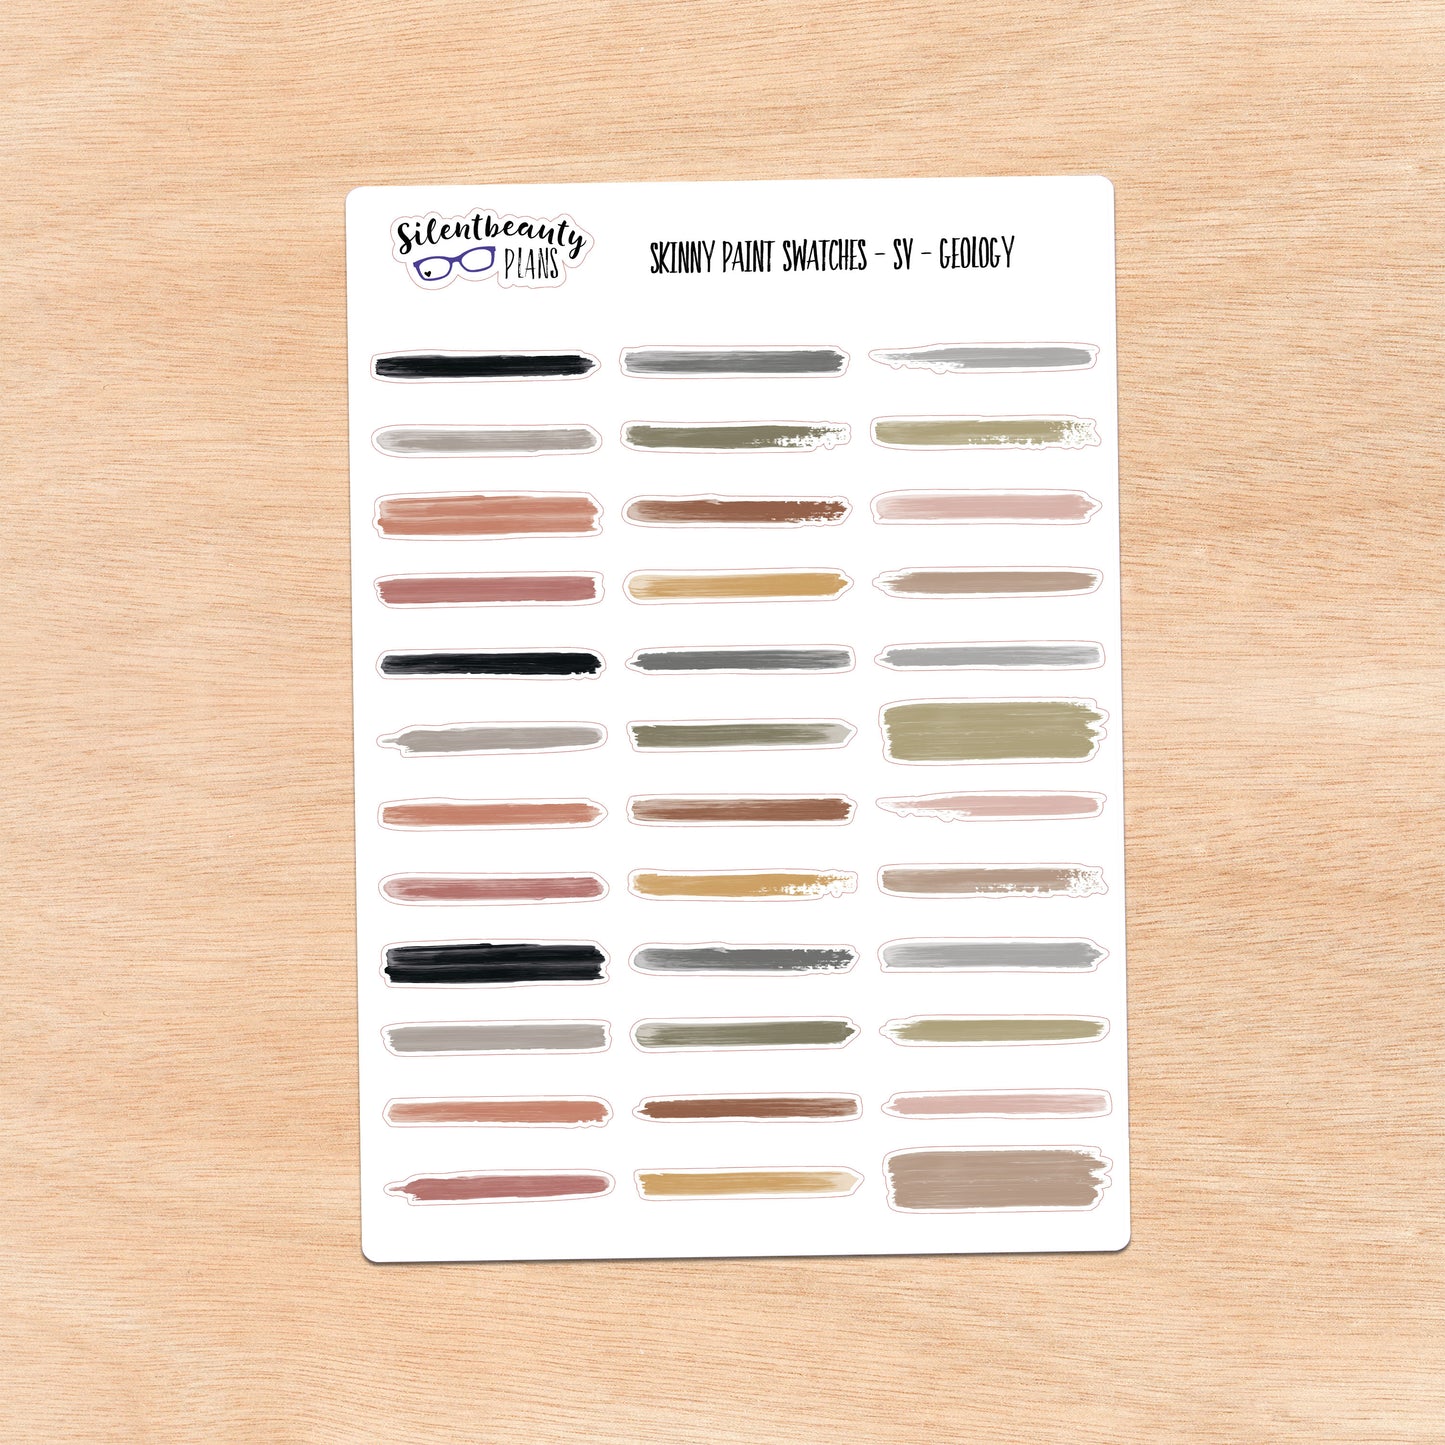 Geology Palette Paint Swatch Journaling Stickers | 3 Sheet Options